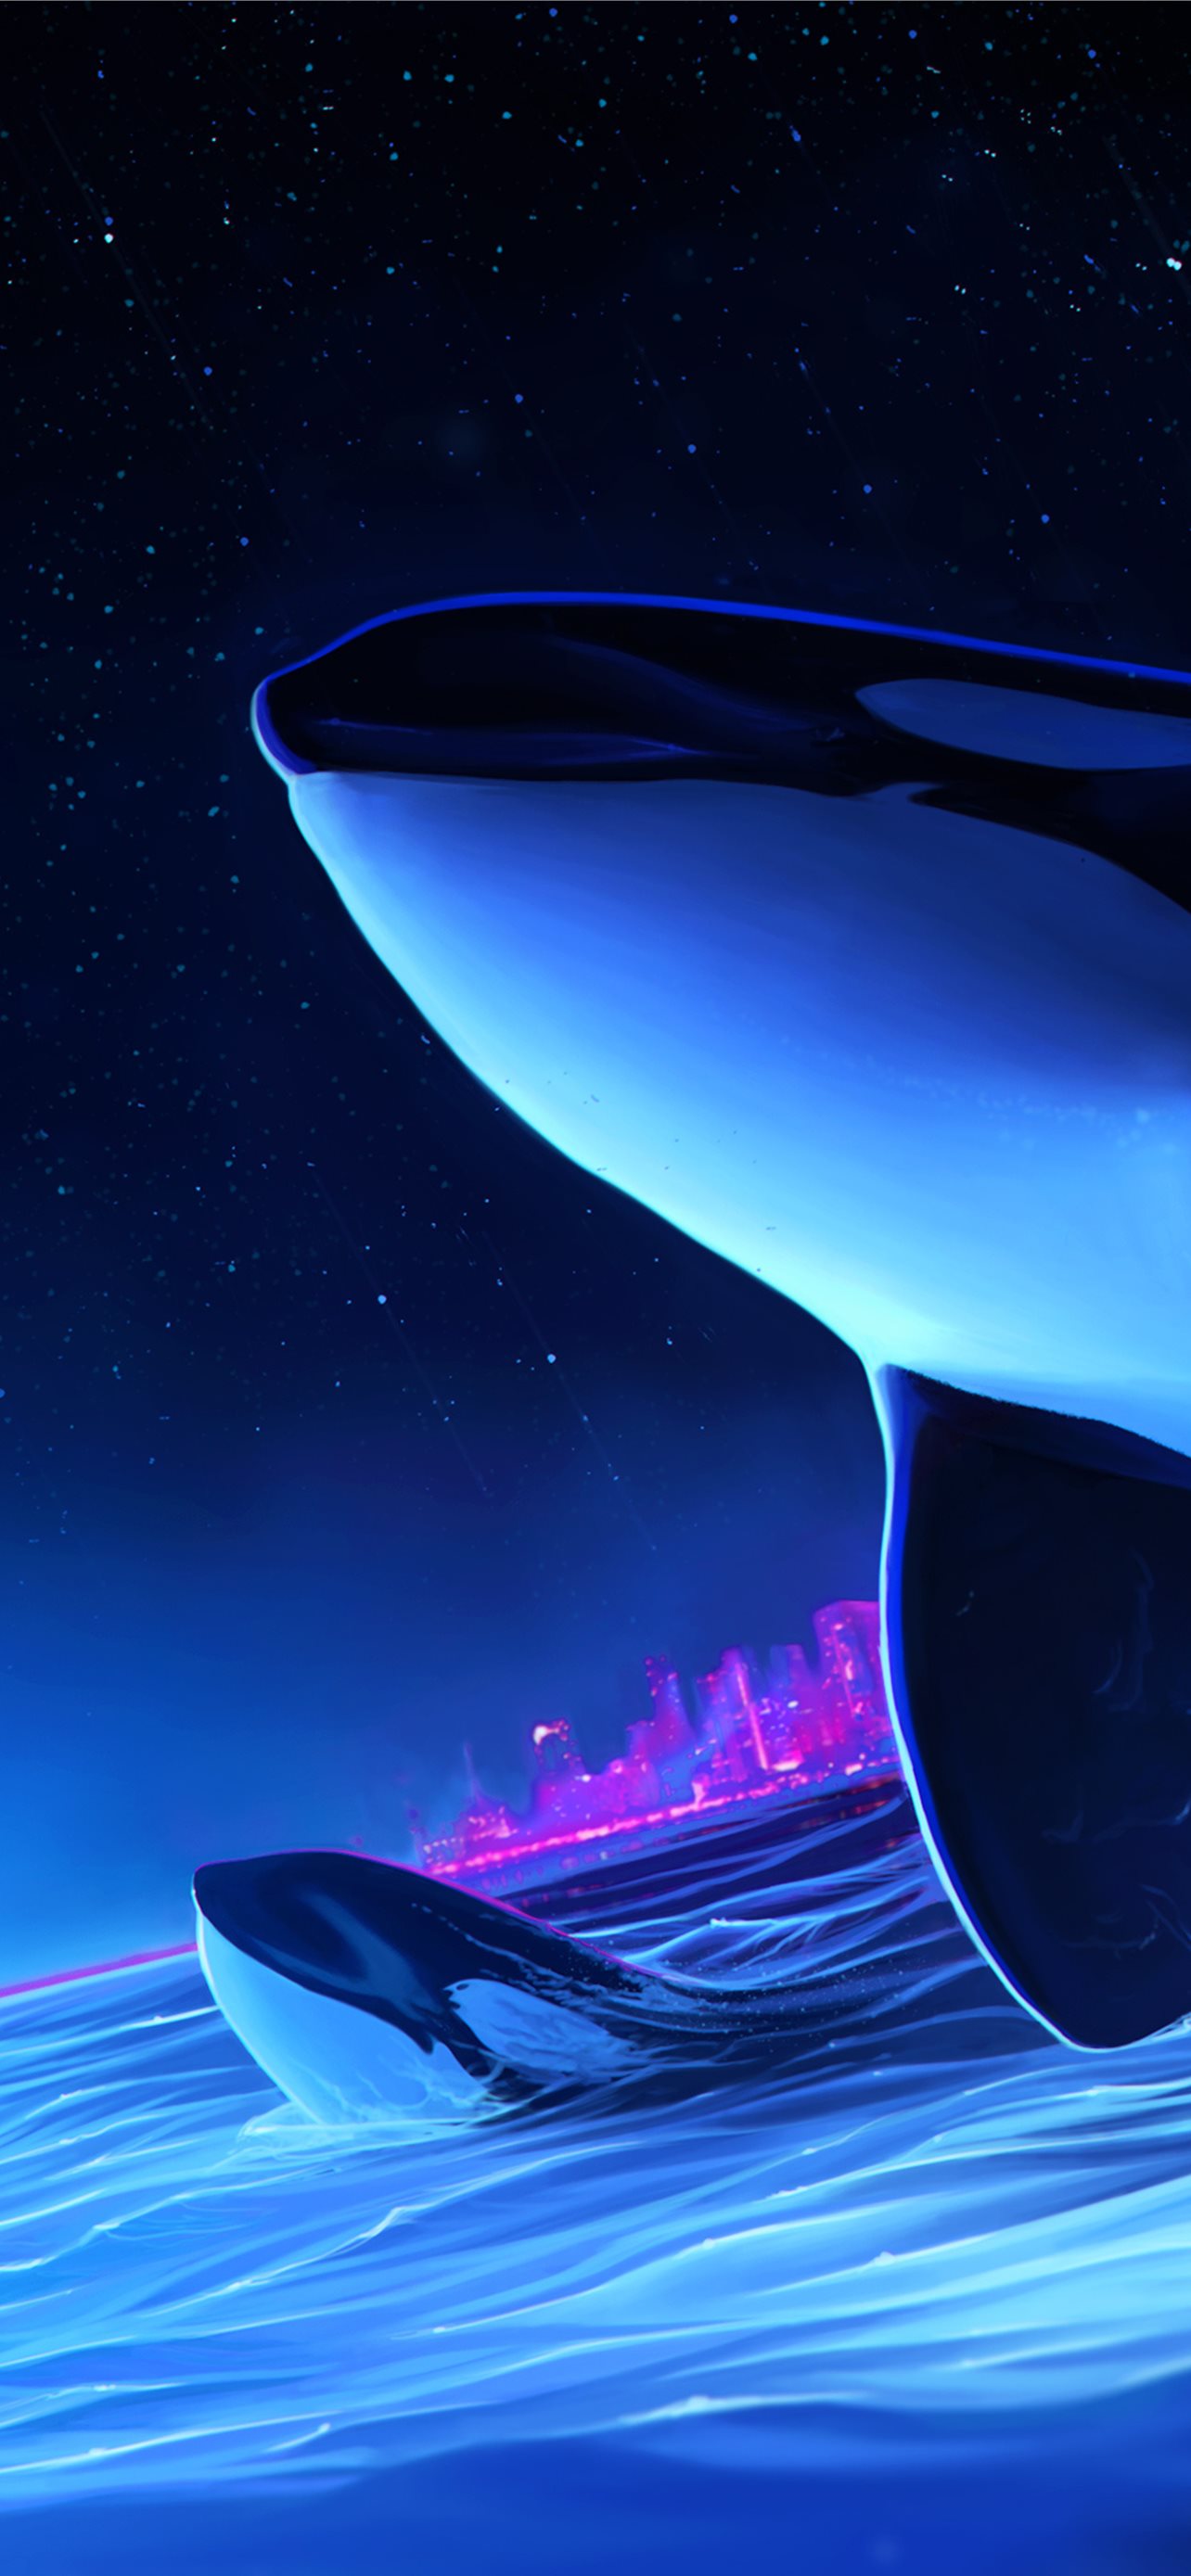 Dolphin Night Orca Whale Digital Art Sony Xperia X Iphone Wallpapers Free Download